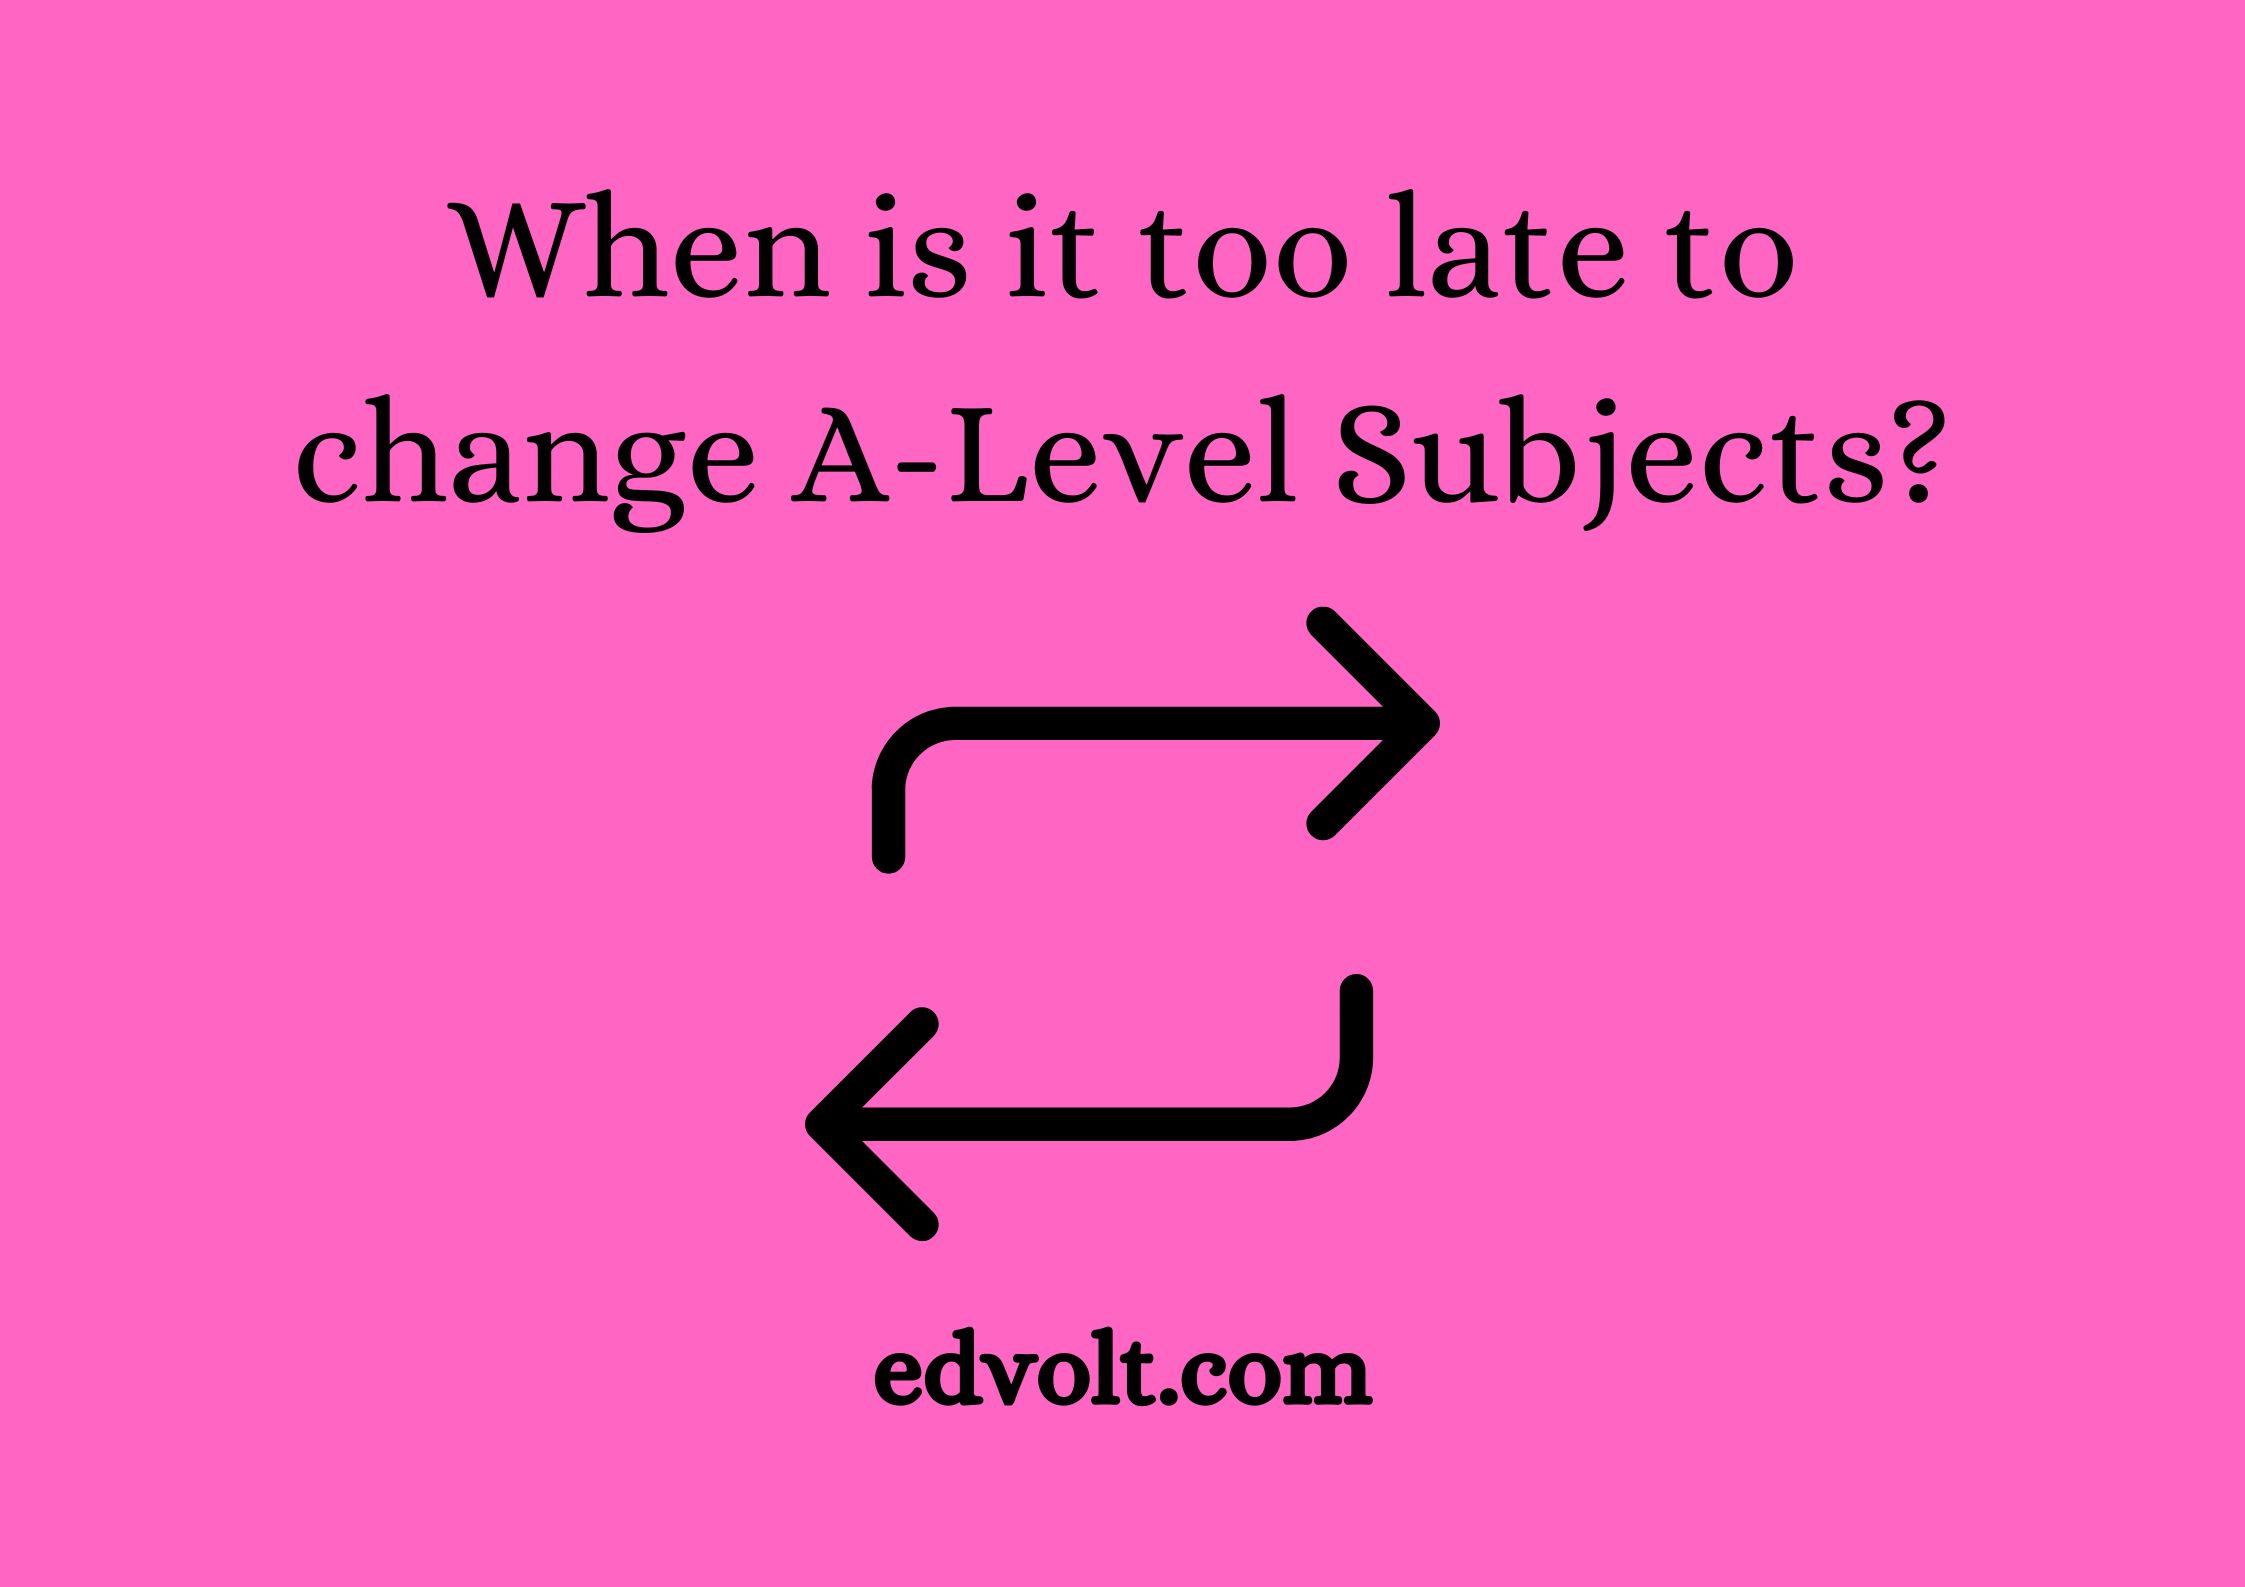 When is it too late to change A-Level Subjects?